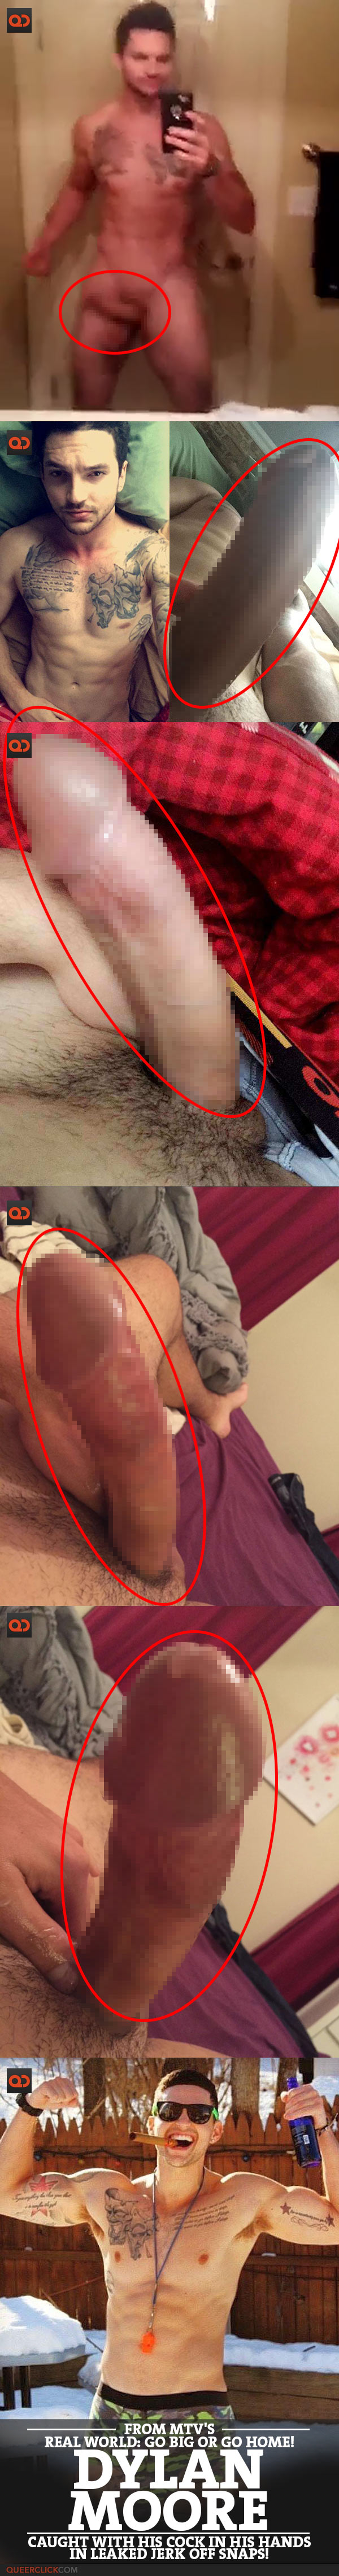 Dylan Moore, From MTV's Real World Go Big Or Go Home, Caught With His Cock In His Hands In Leaked Jerk Off Snaps!